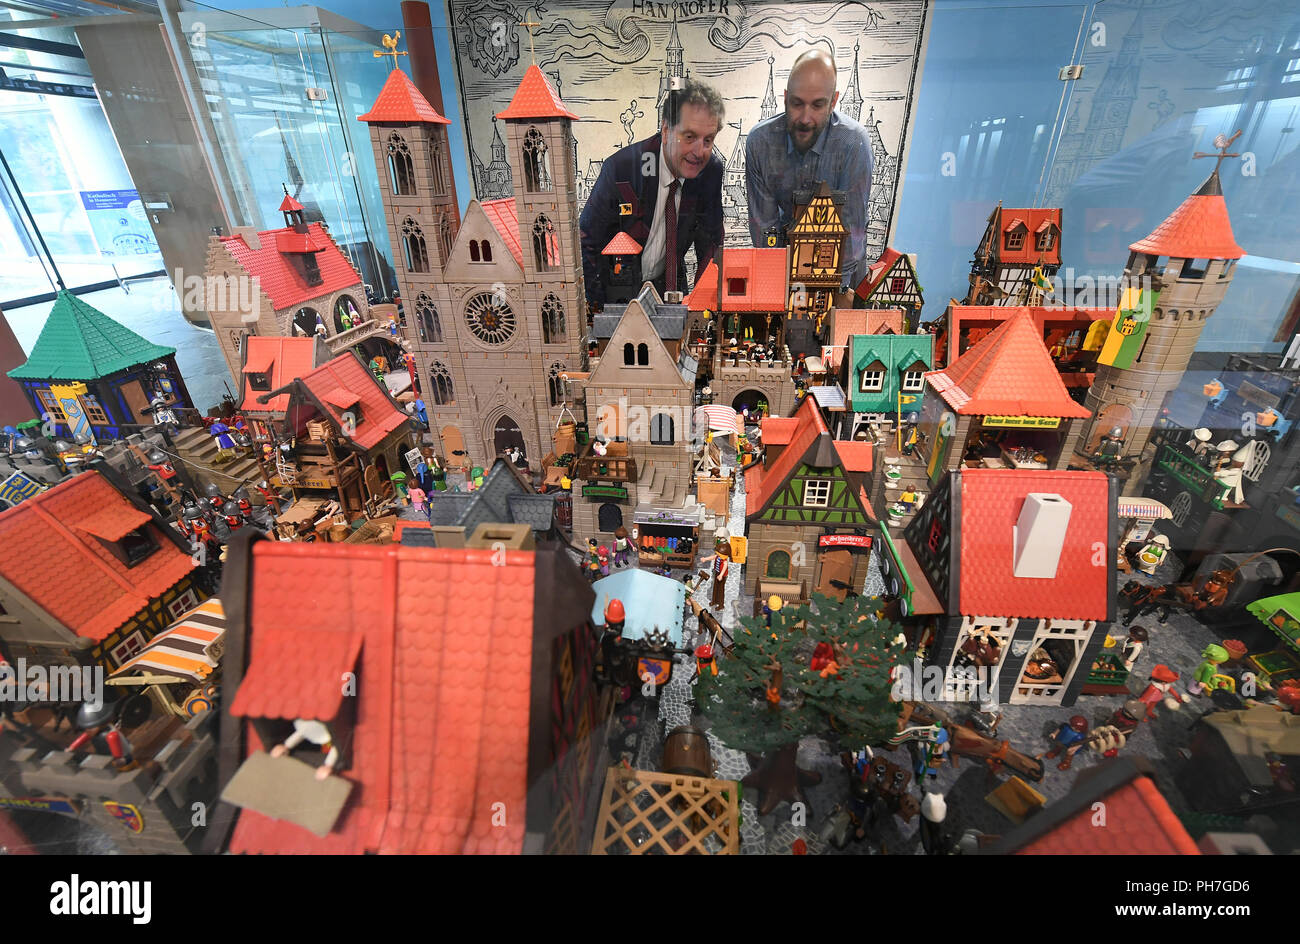 Hanover, Germany. 31st Aug, 2018. Thomas Schwark (l), Director of the  Historisches Museum Hannover, and hobby craftsman and exhibition designer  Robert Packeiser (r), look at a diorama of a medieval world in